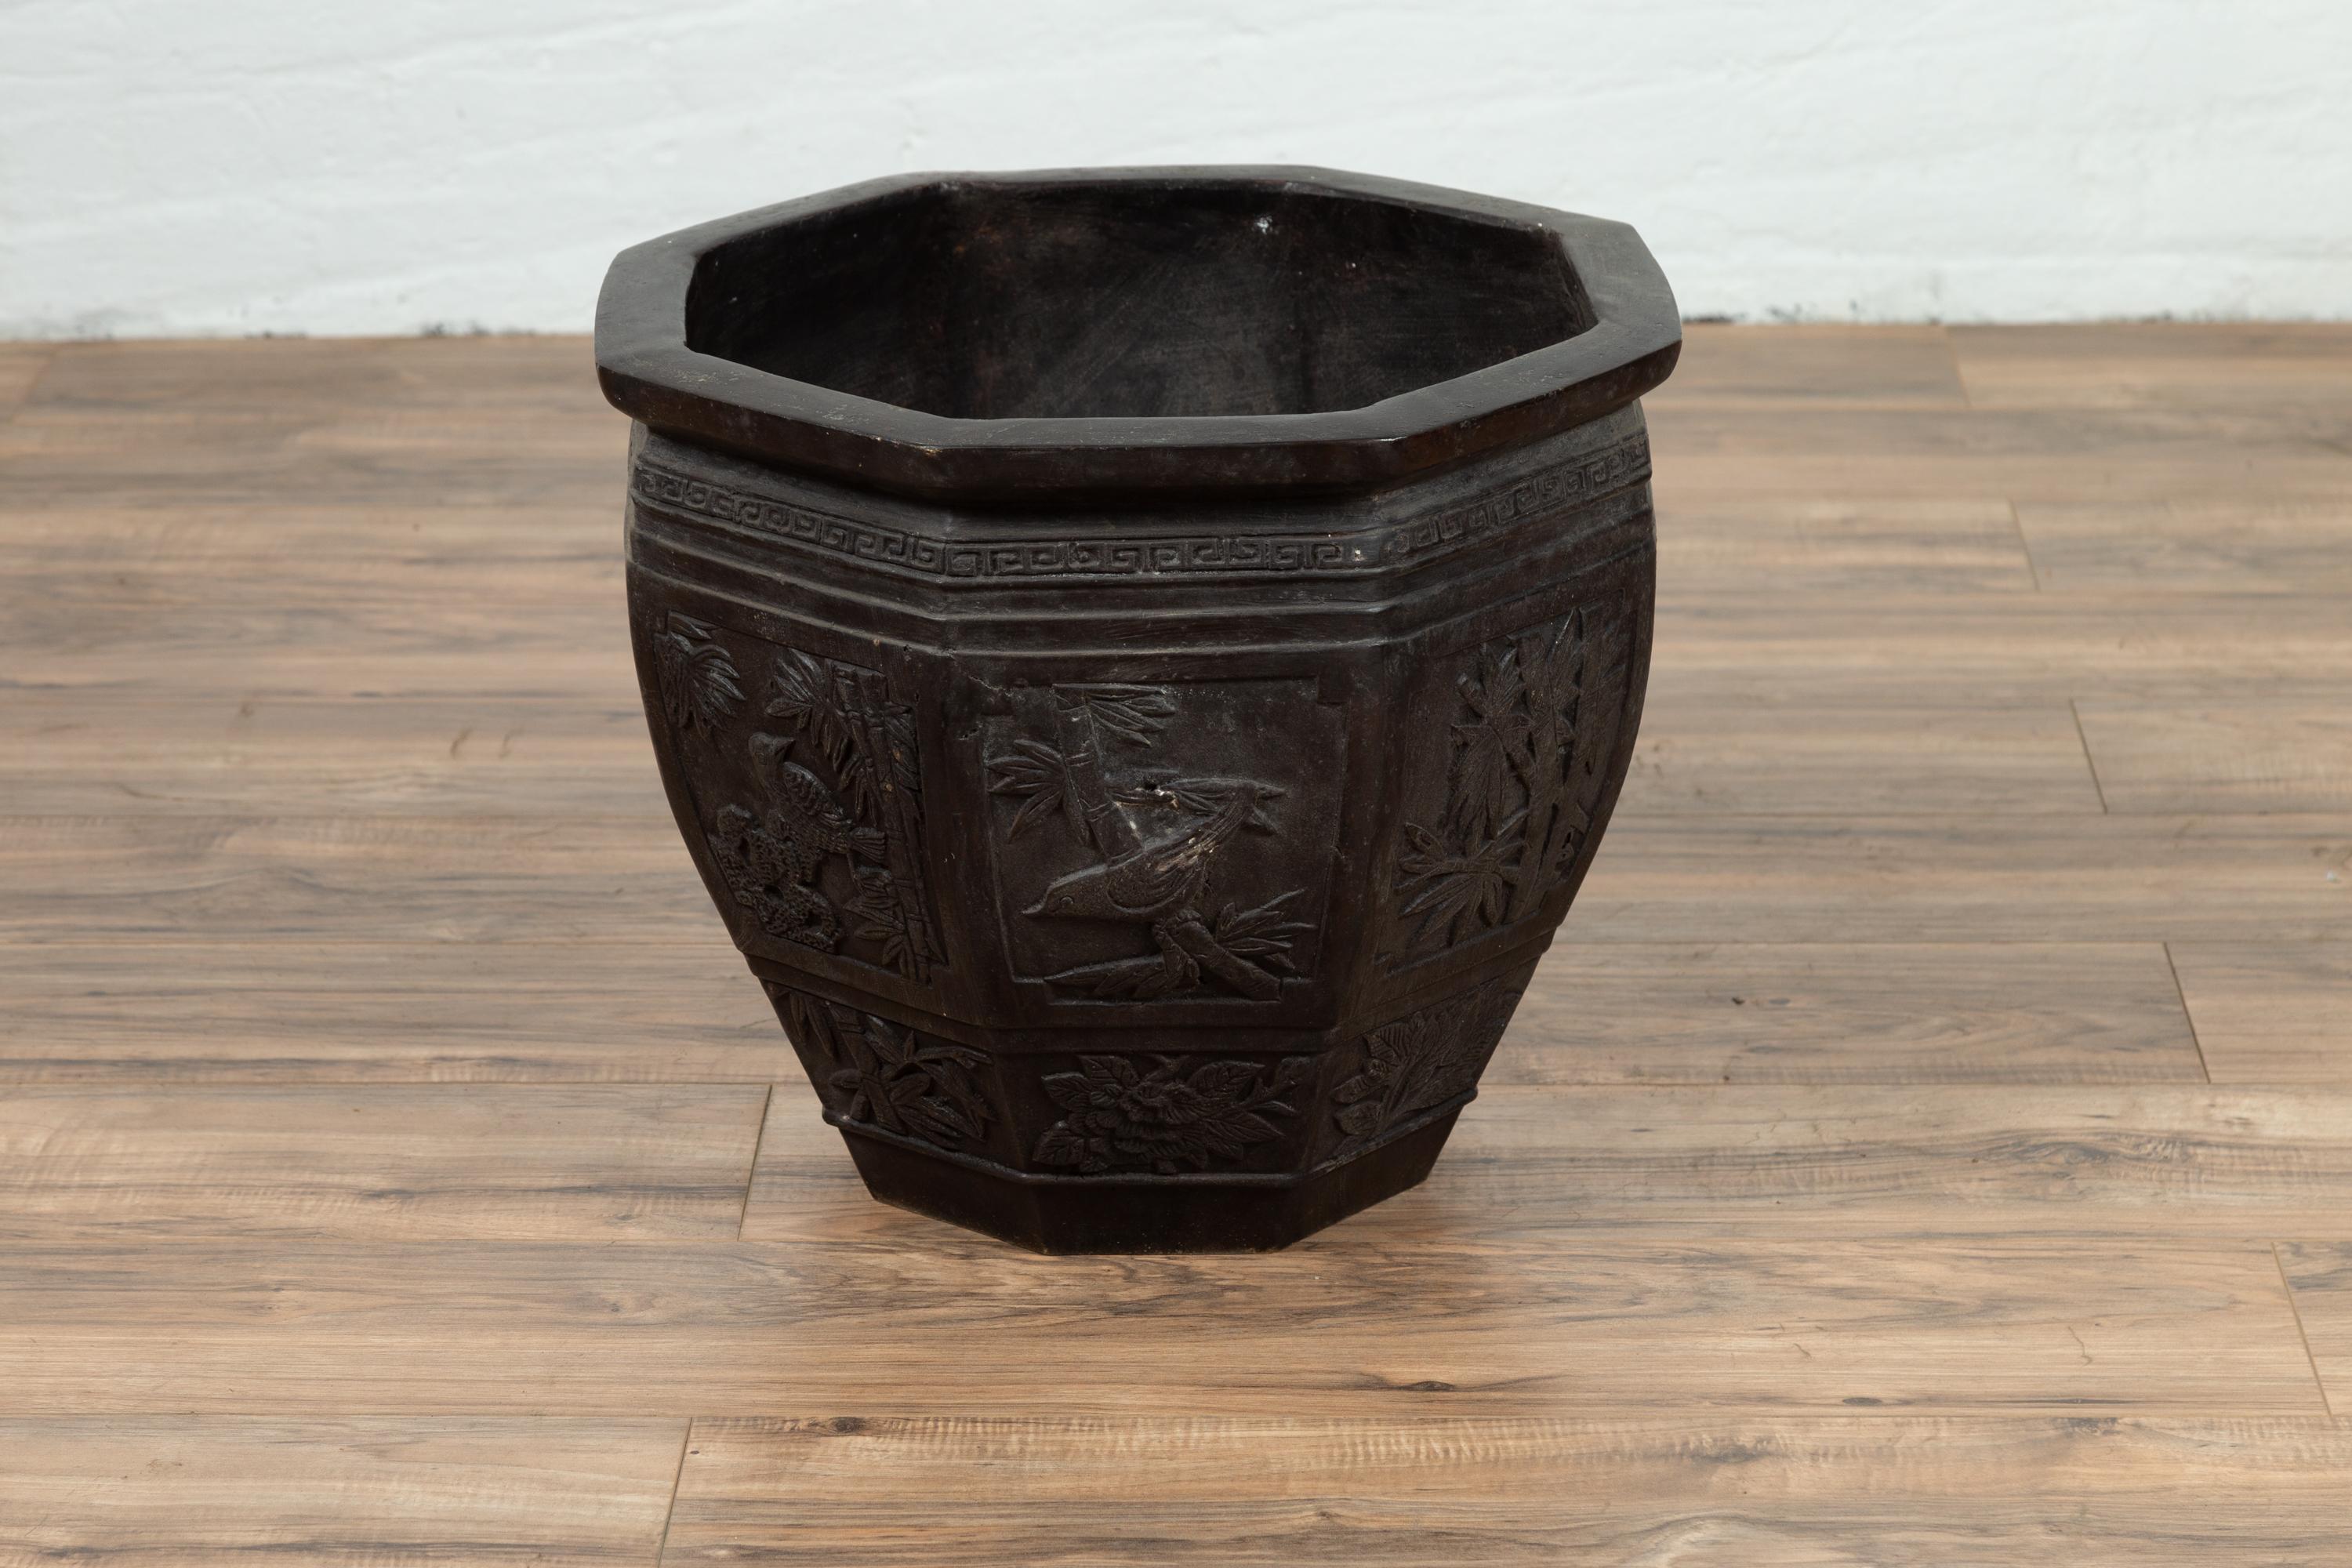 Vintage Asian Octagonal Bronze Planter with Floral, Foliage and Bird Motifs 2